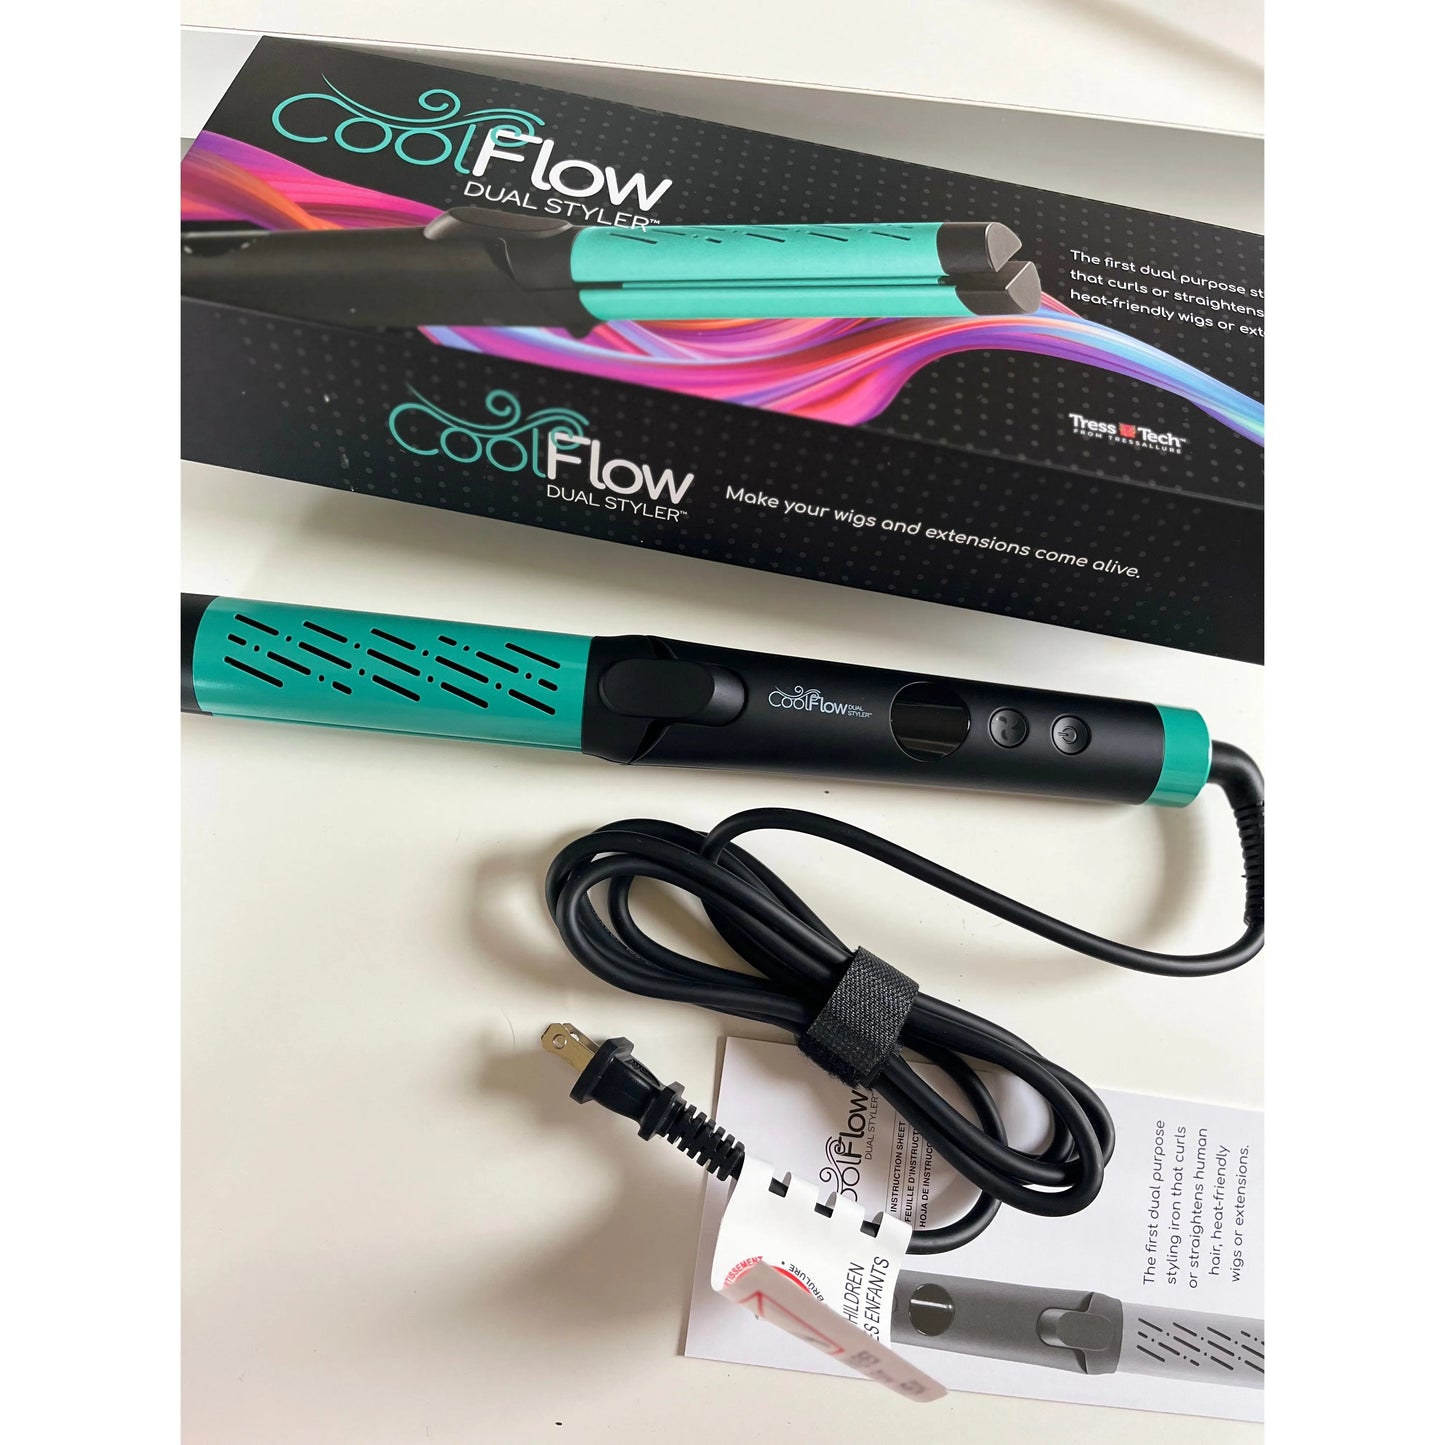 MEGA BUNDLE DEAL! TressTech CoolFlow Dual Styler, Travel Wig Wax, & Full Sized Dual Conditioning Spray